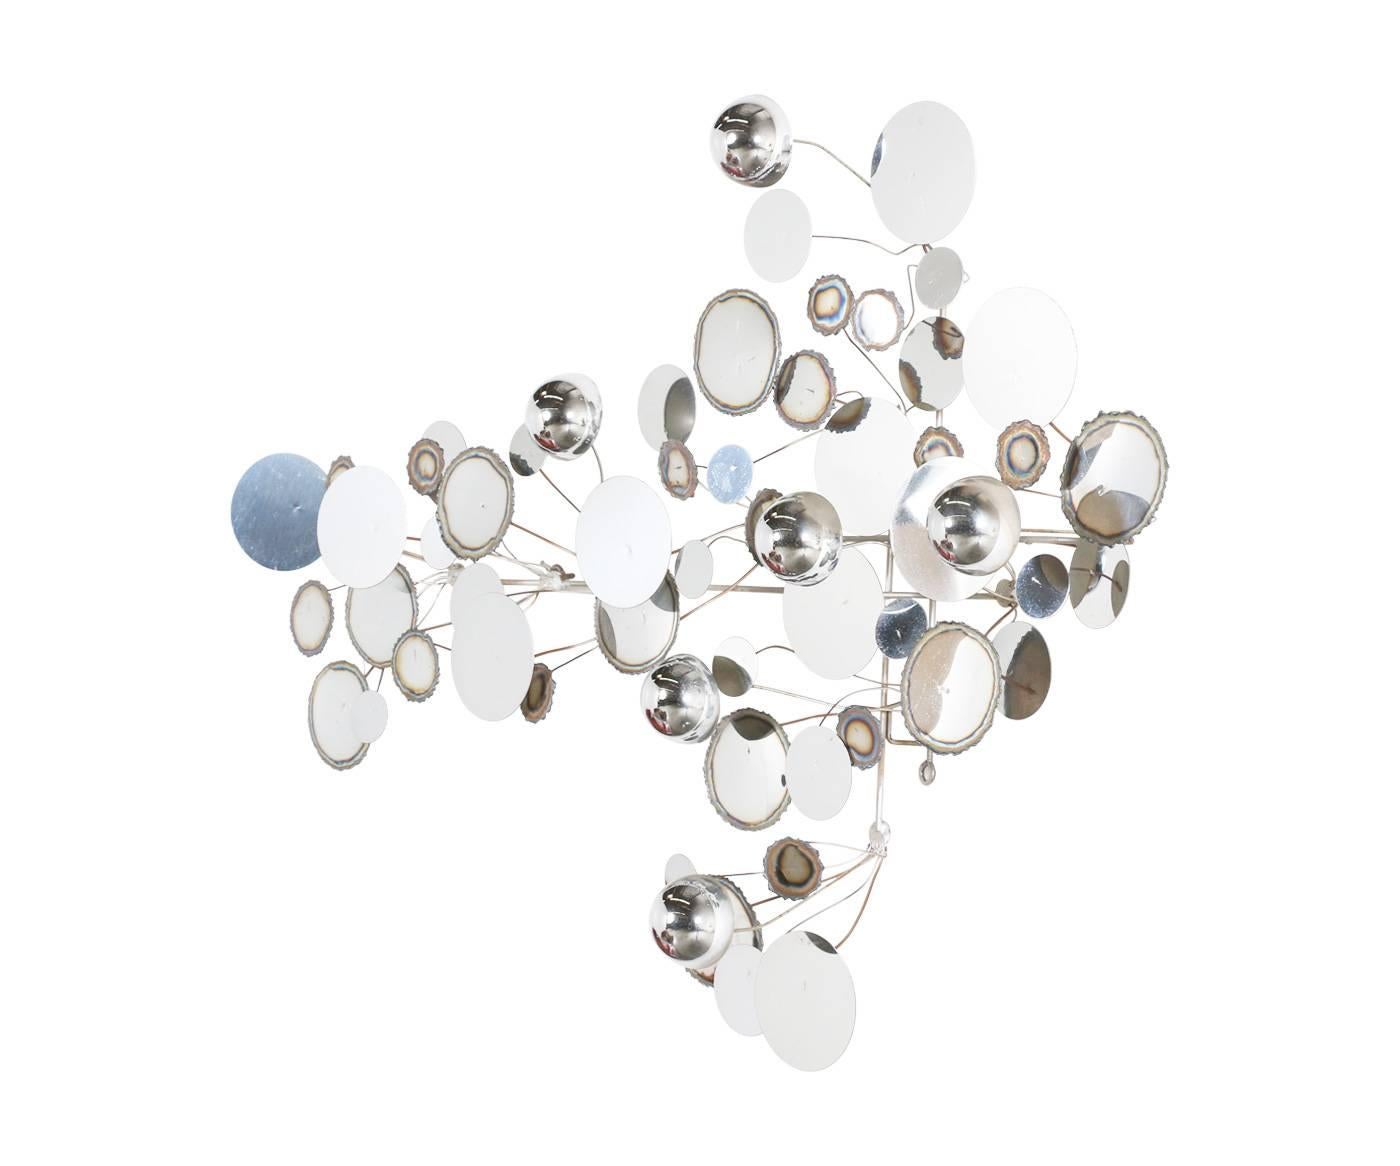 Mid-Century Modern Curtis Jere “Raindrops” Chrome Wall Sculpture for Artsian House